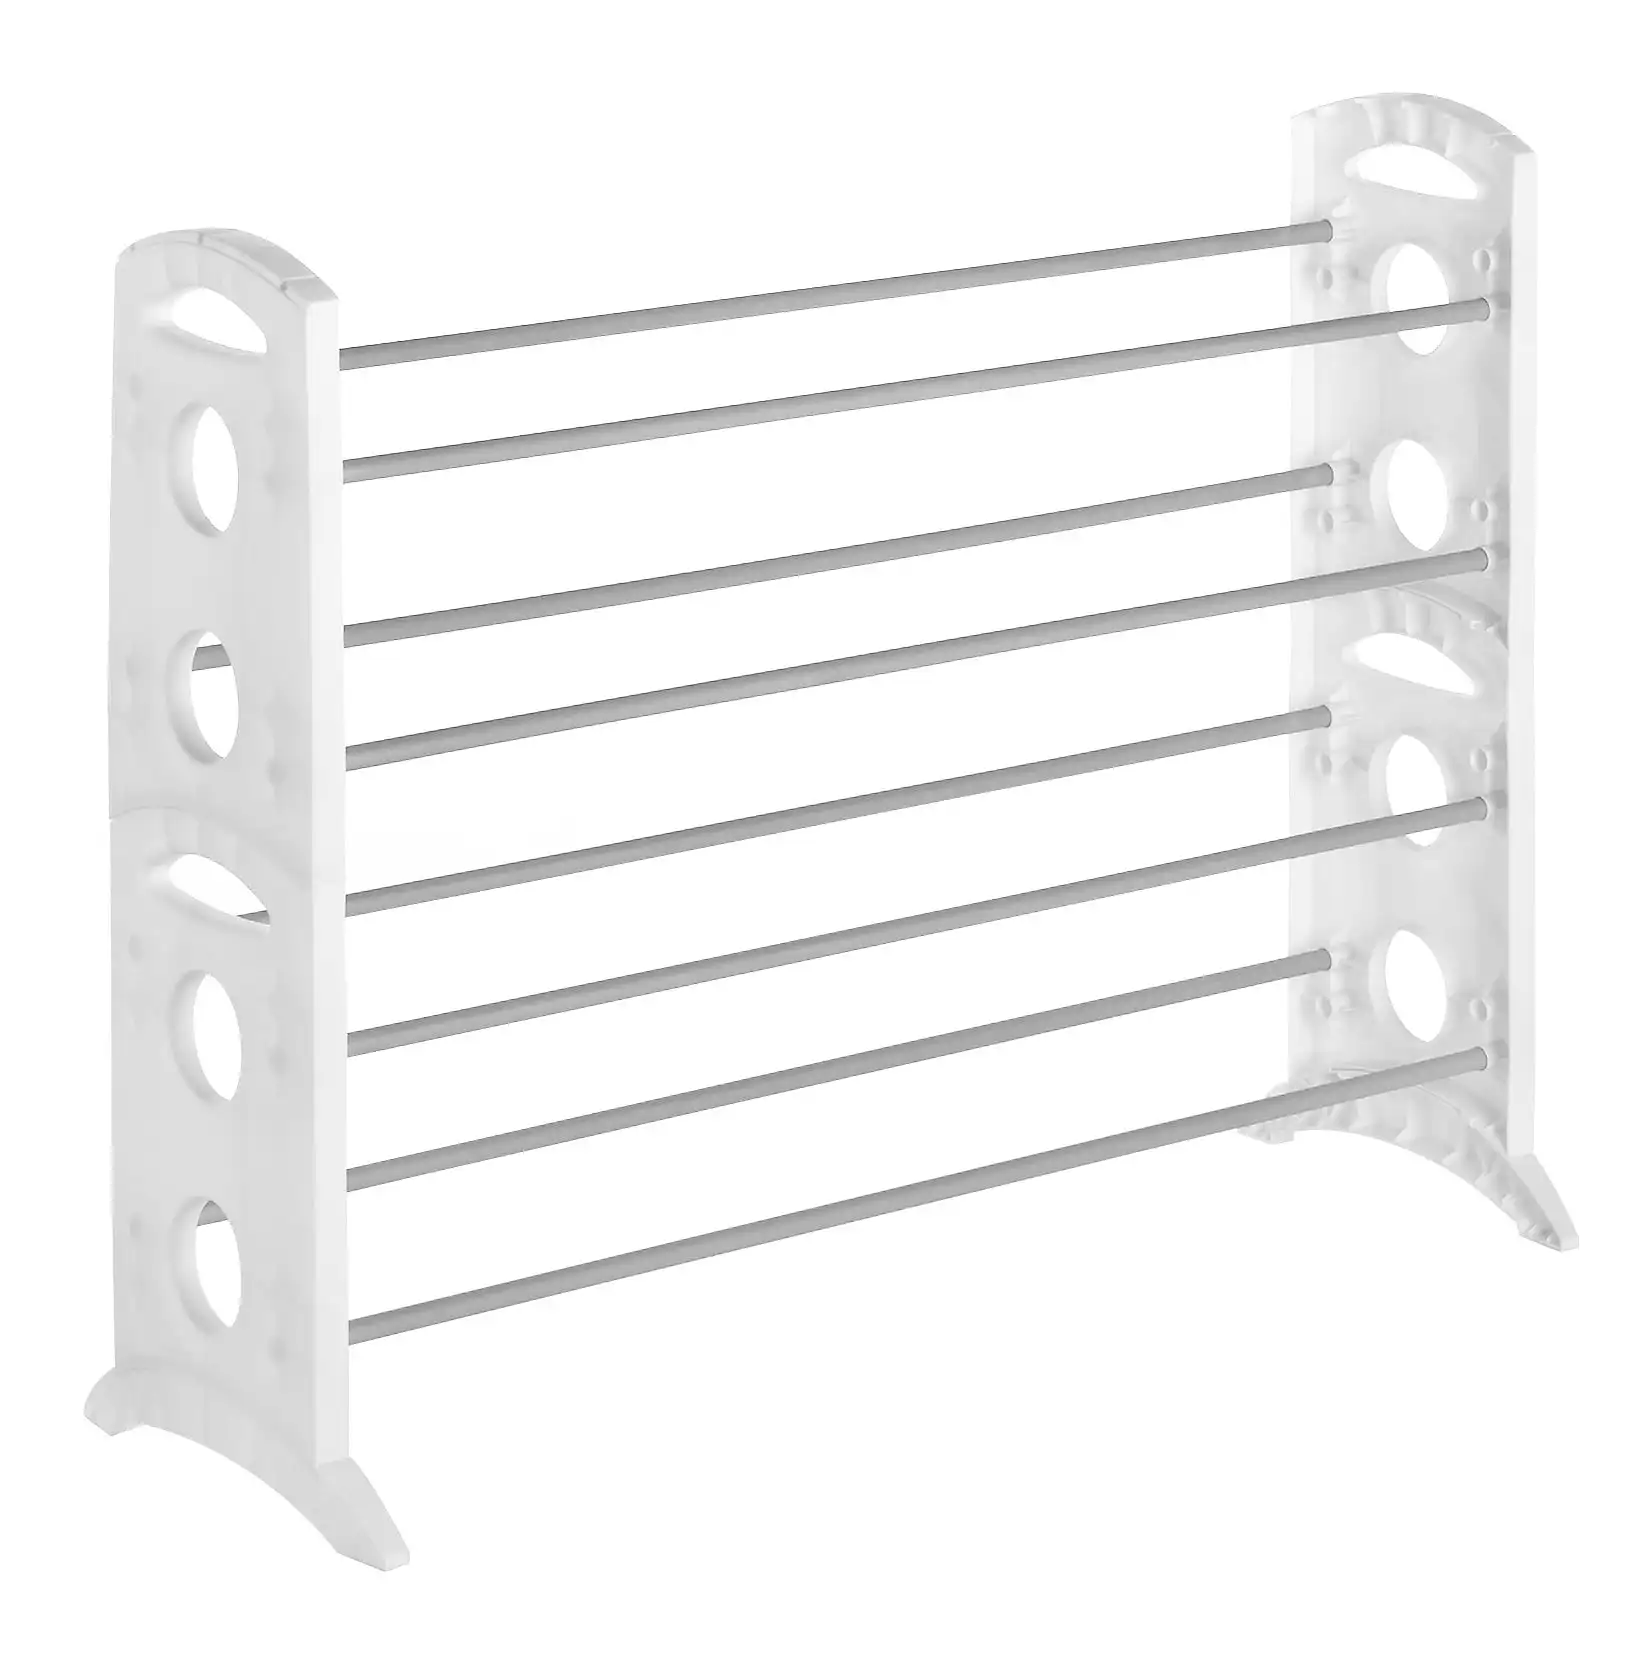 

Whitmor 4-Tier, 20 Pair Freestanding Shoe Rack, Metal and Plastic, Silver and White